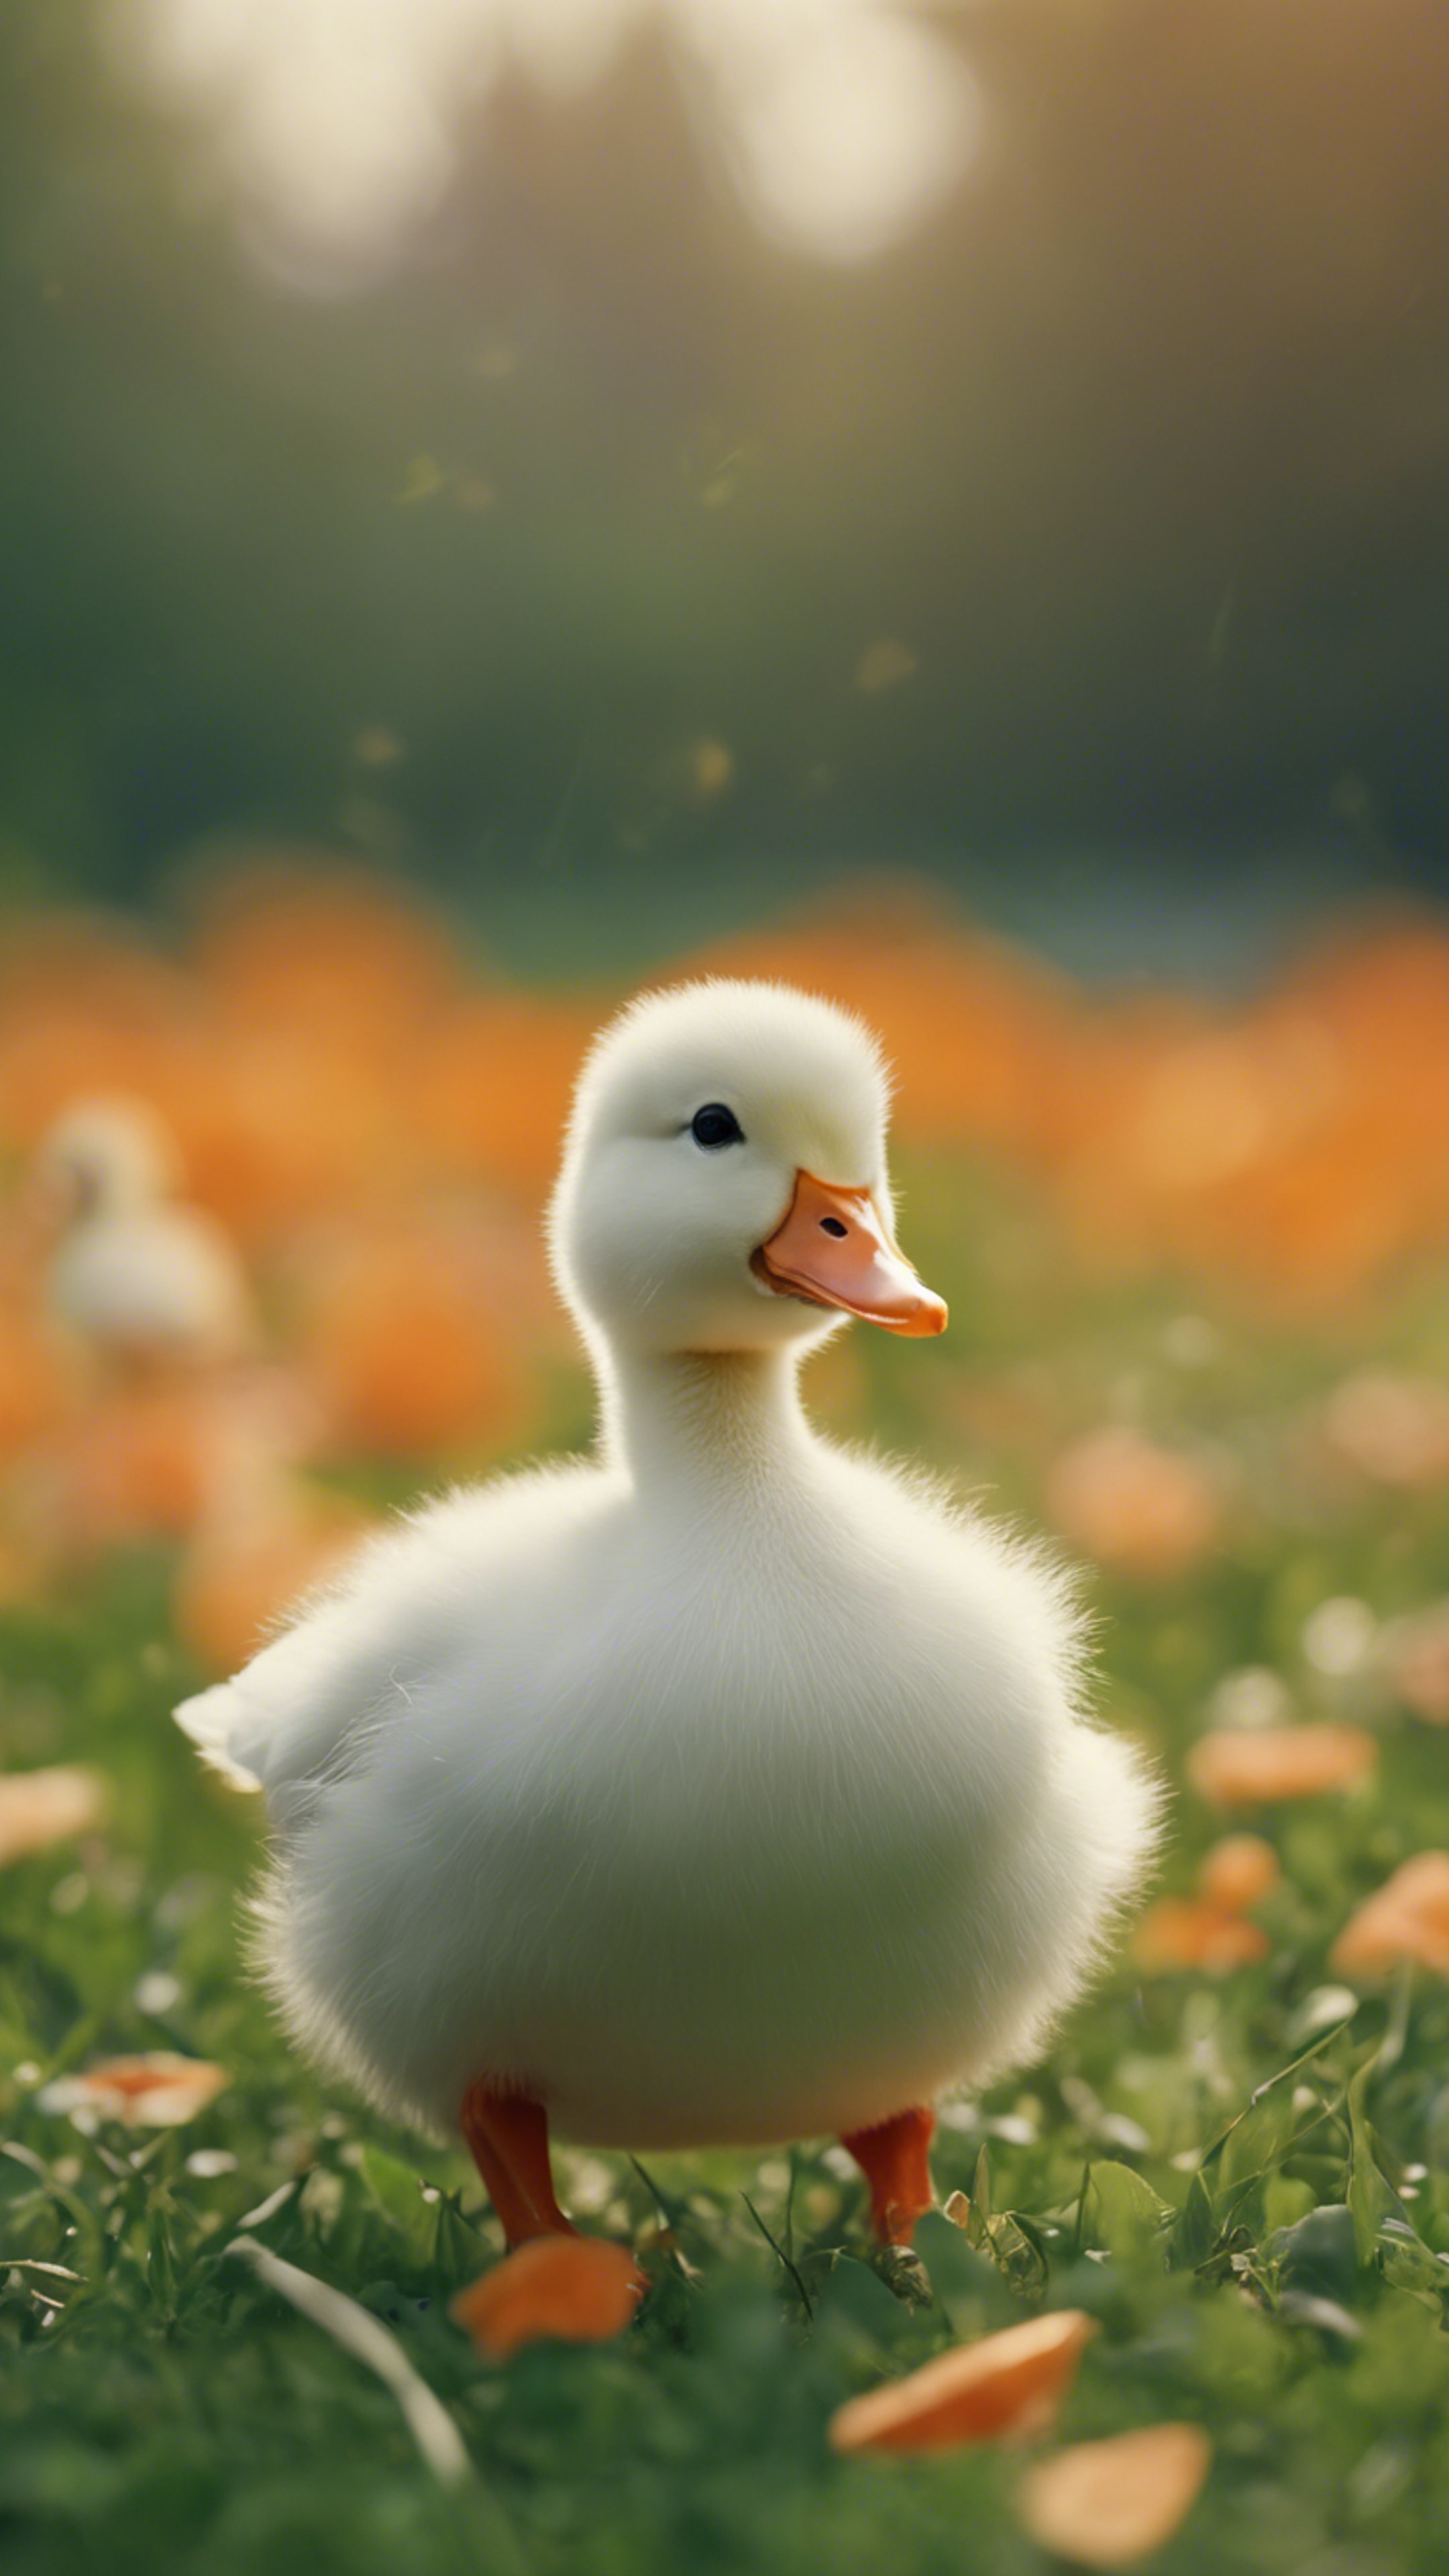 An adorable fluffy white duck with a bright orange bill is waddling happily across a green meadow. Fondo de pantalla[c976b0c80c1040dead0f]